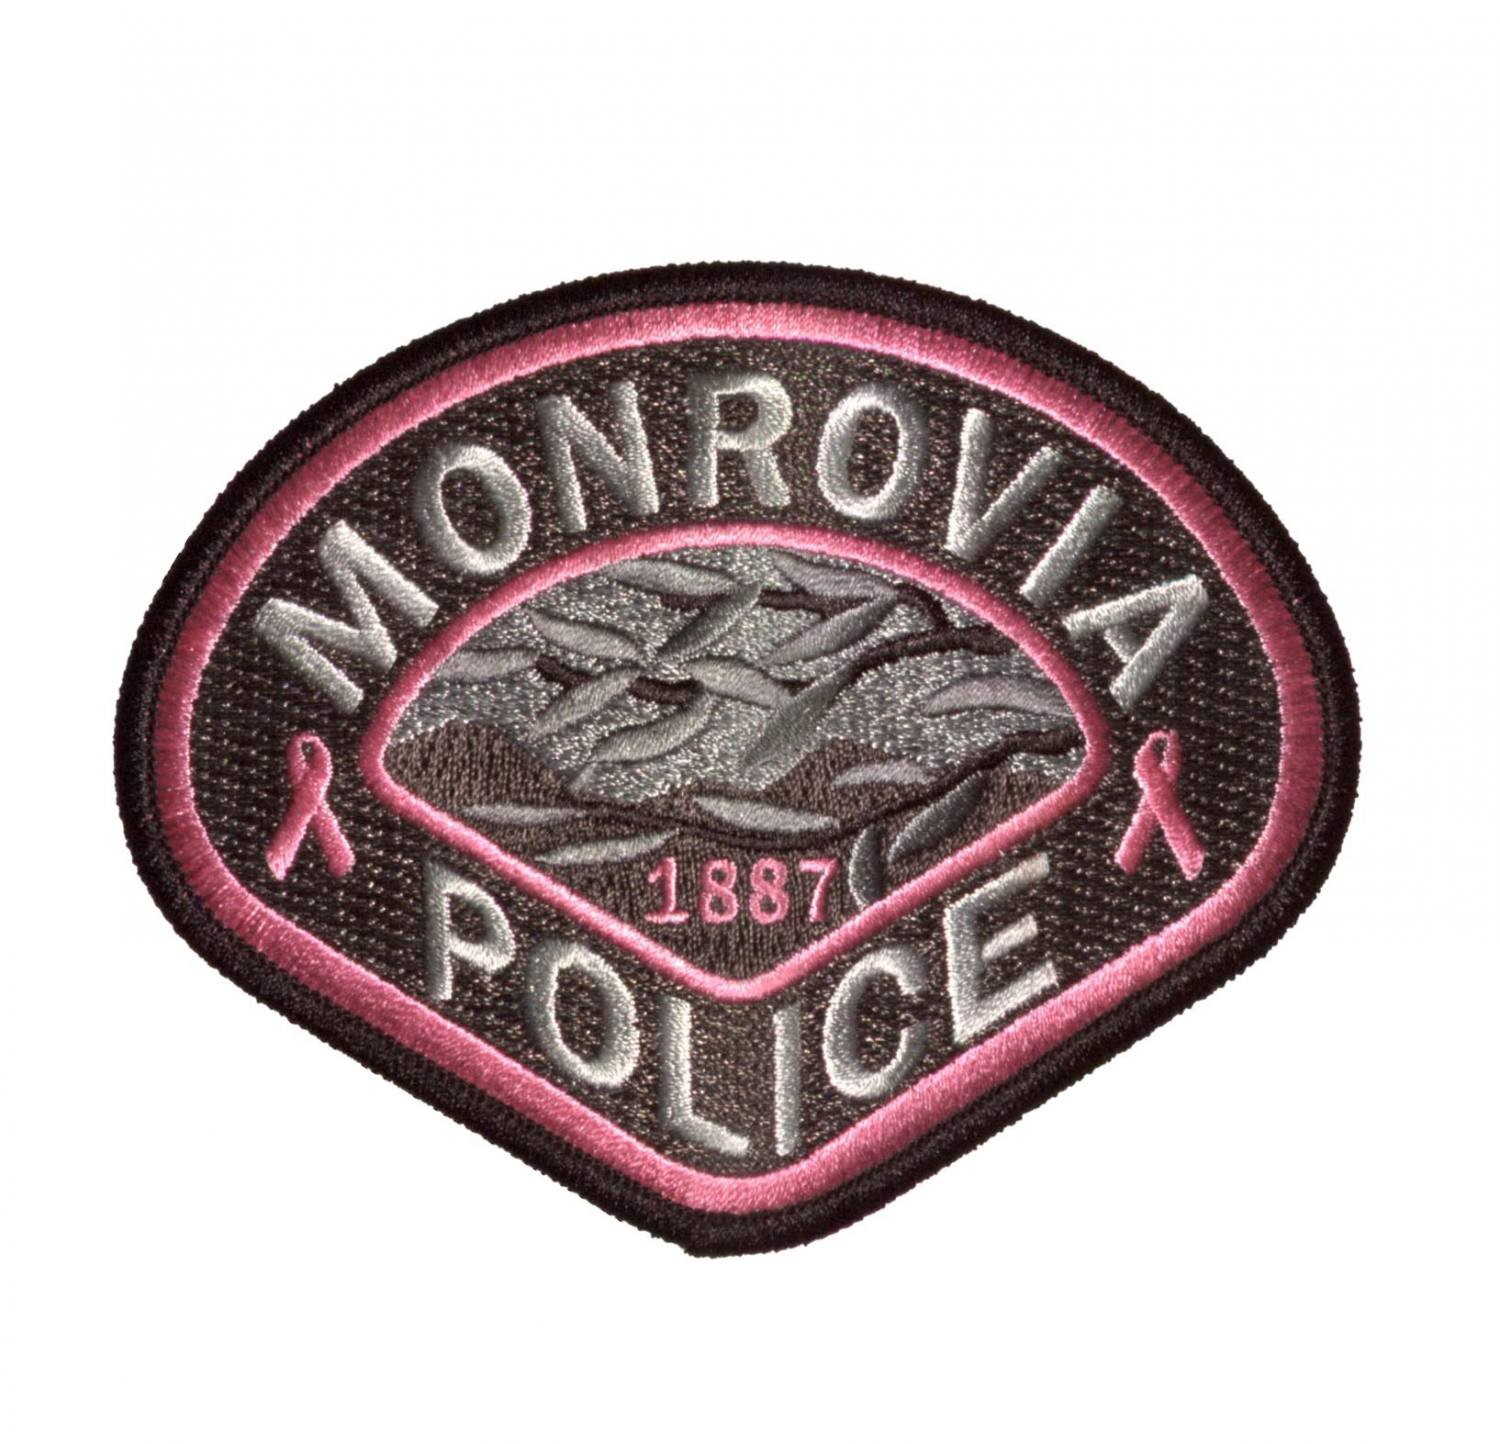 Pink Police Patches